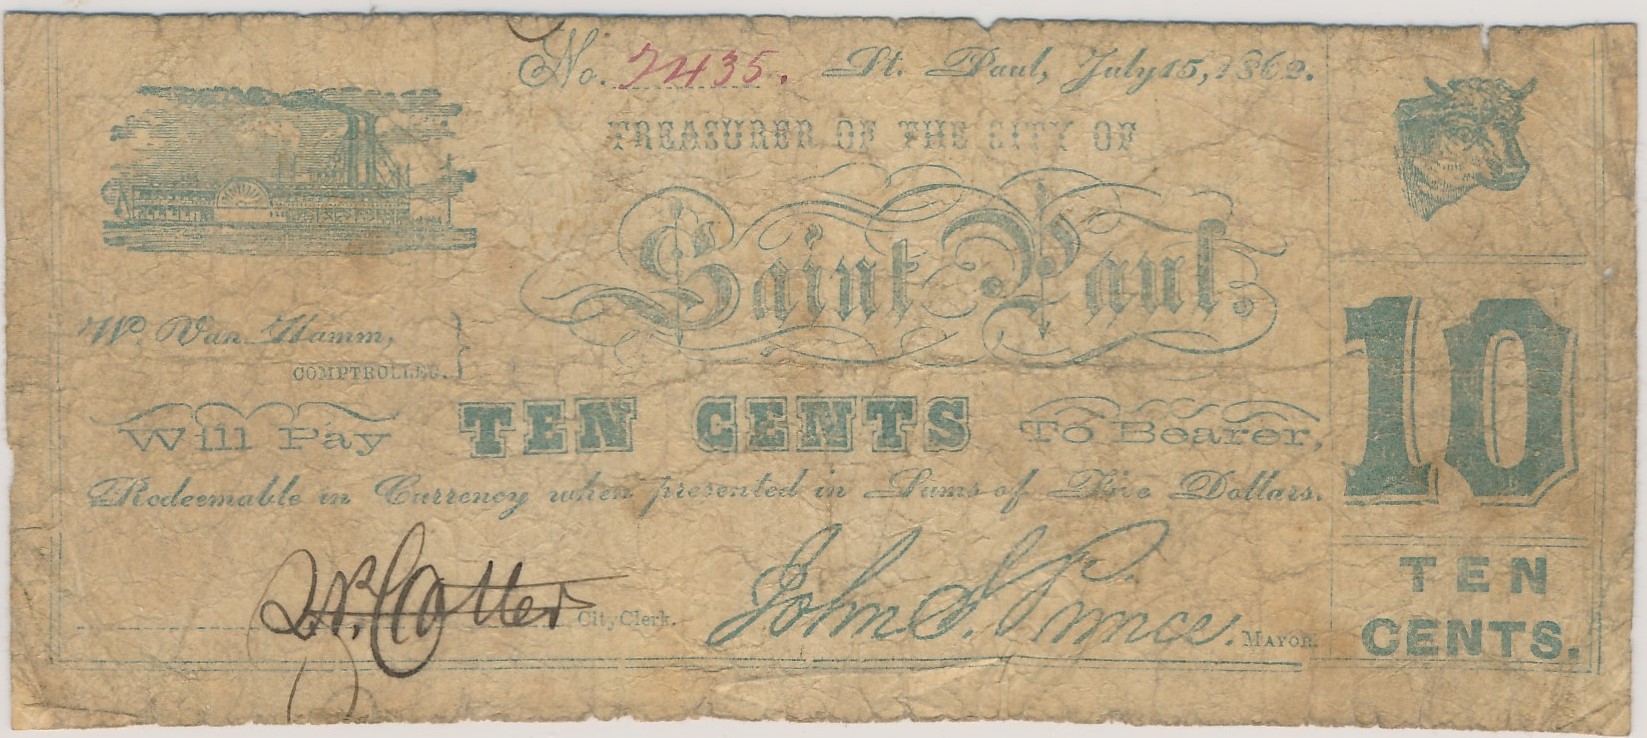 $.10 Treasurer of the City of Saint Paul (First Issue)